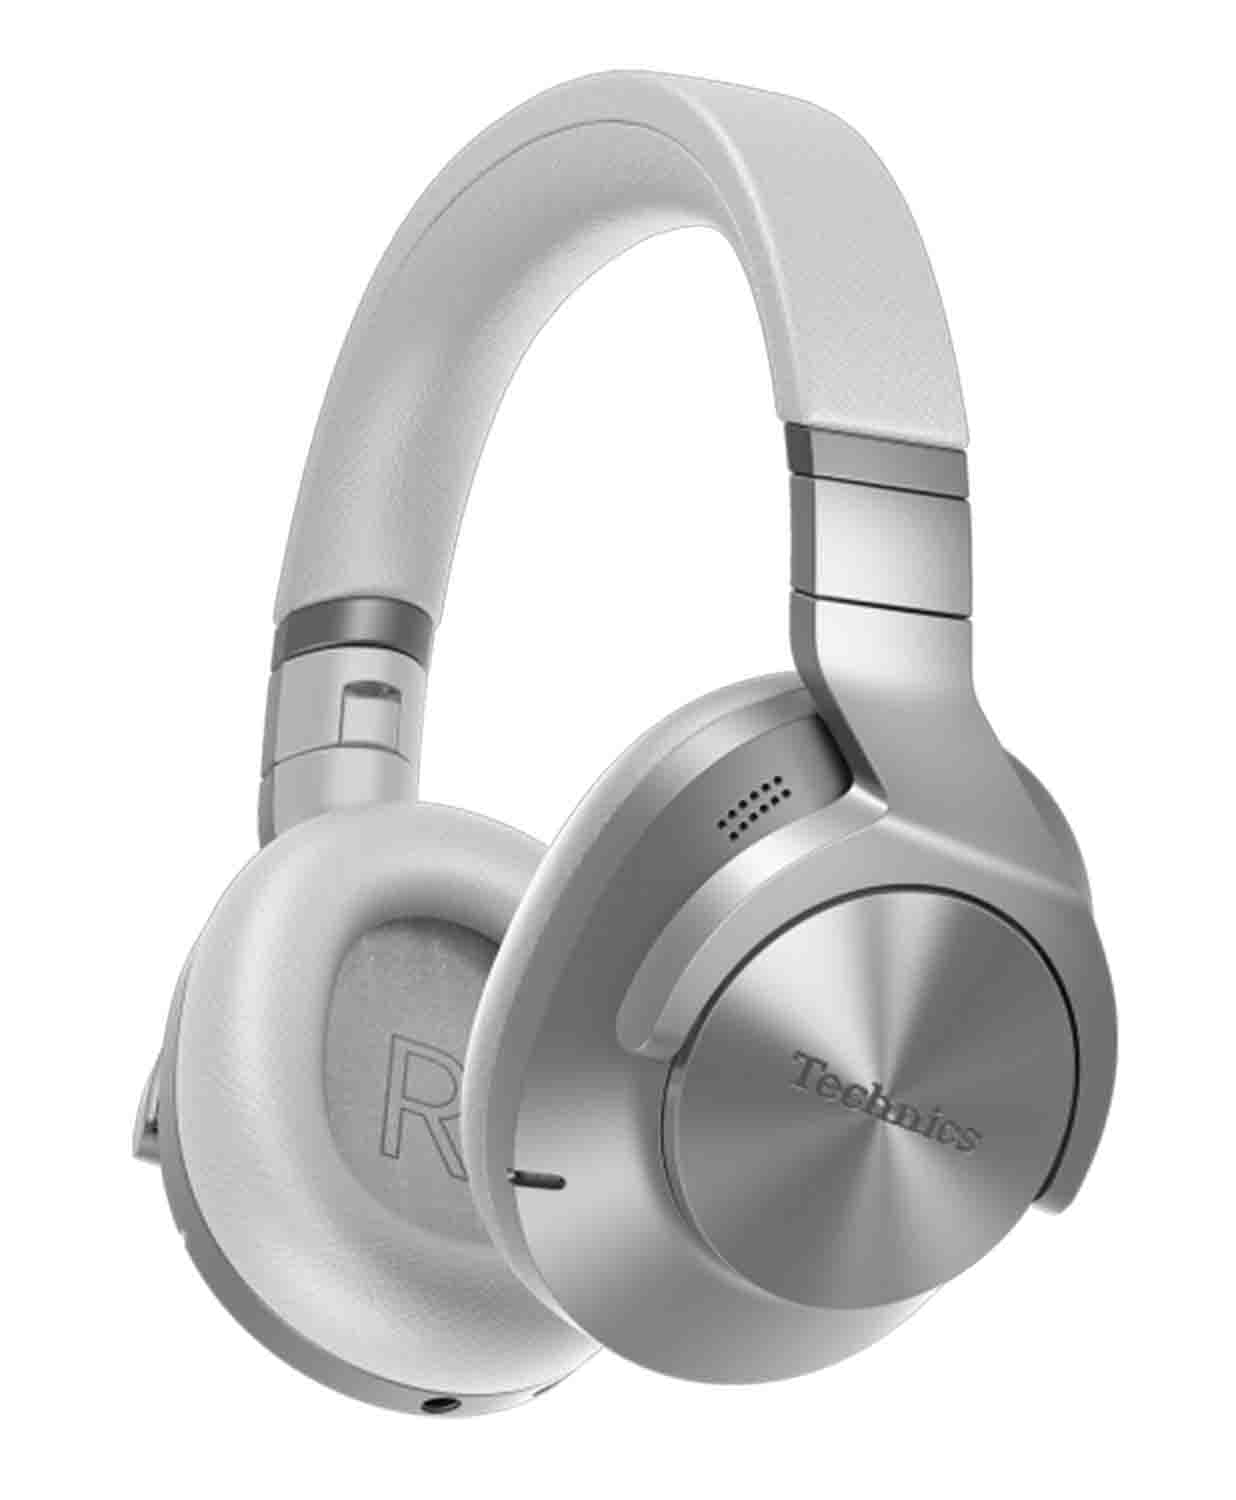 Technics EAH-A800 Wireless Headphones with Noise Cancelling and Microphone - Silver by Technics